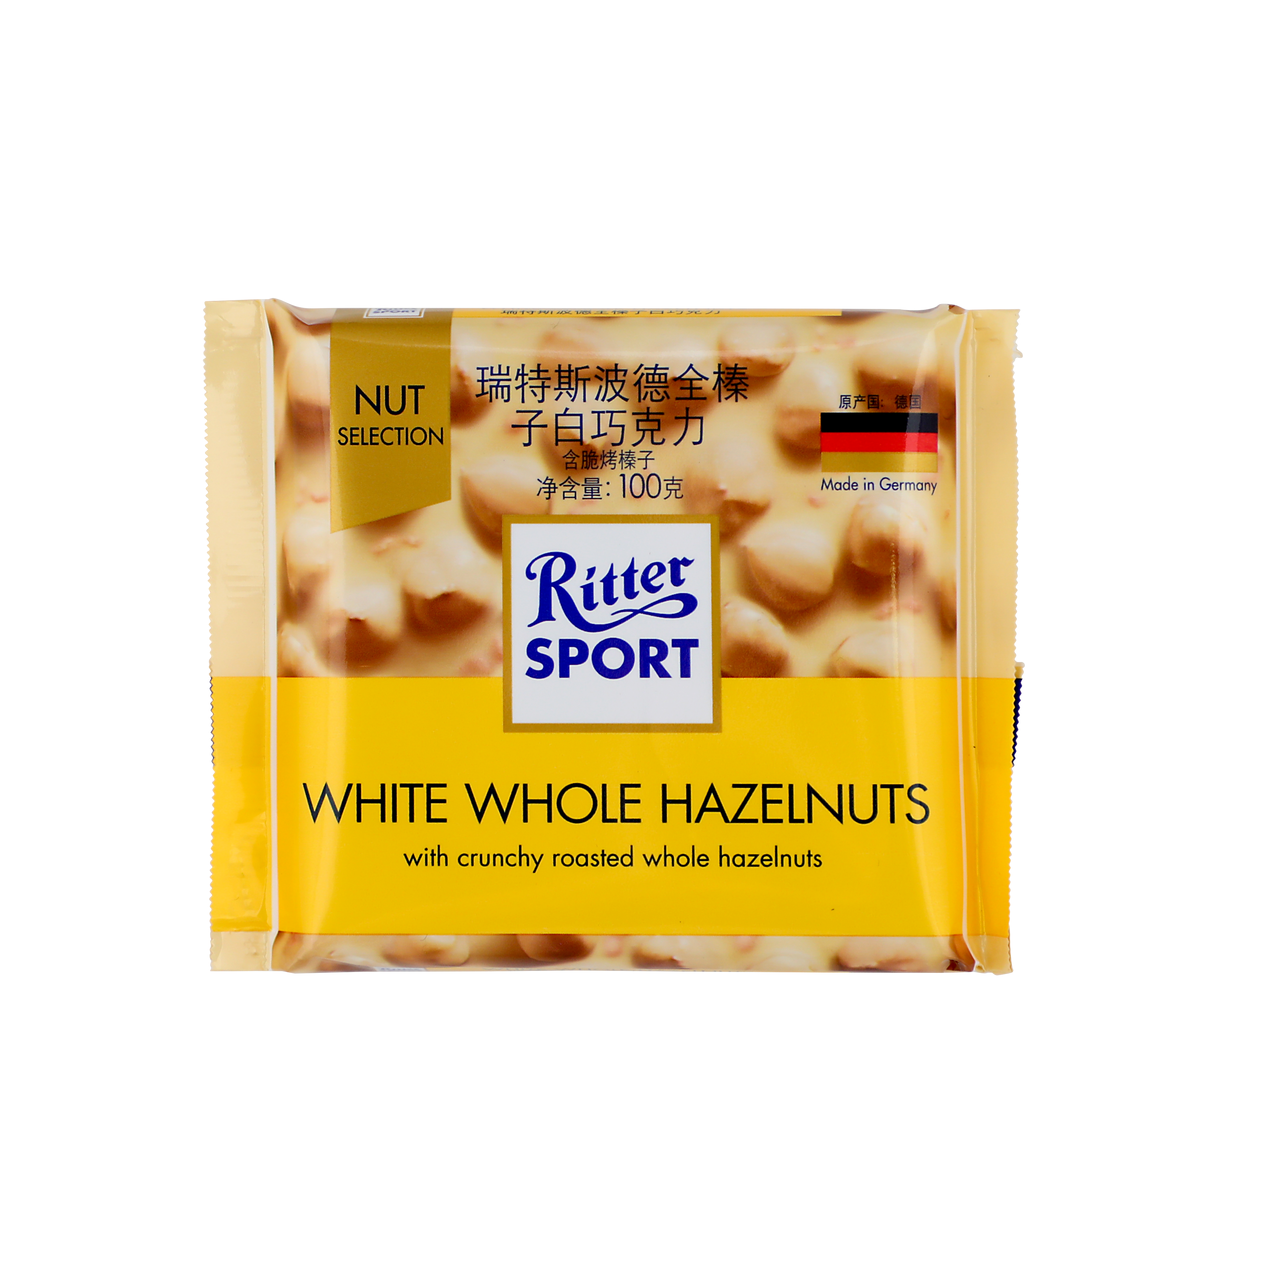 Ritter Sport White Whole Hazelnut Chocolate 100G | Free Delivery | Same Day Dispatch | Made In Germany | Imported Fine German Chocolate